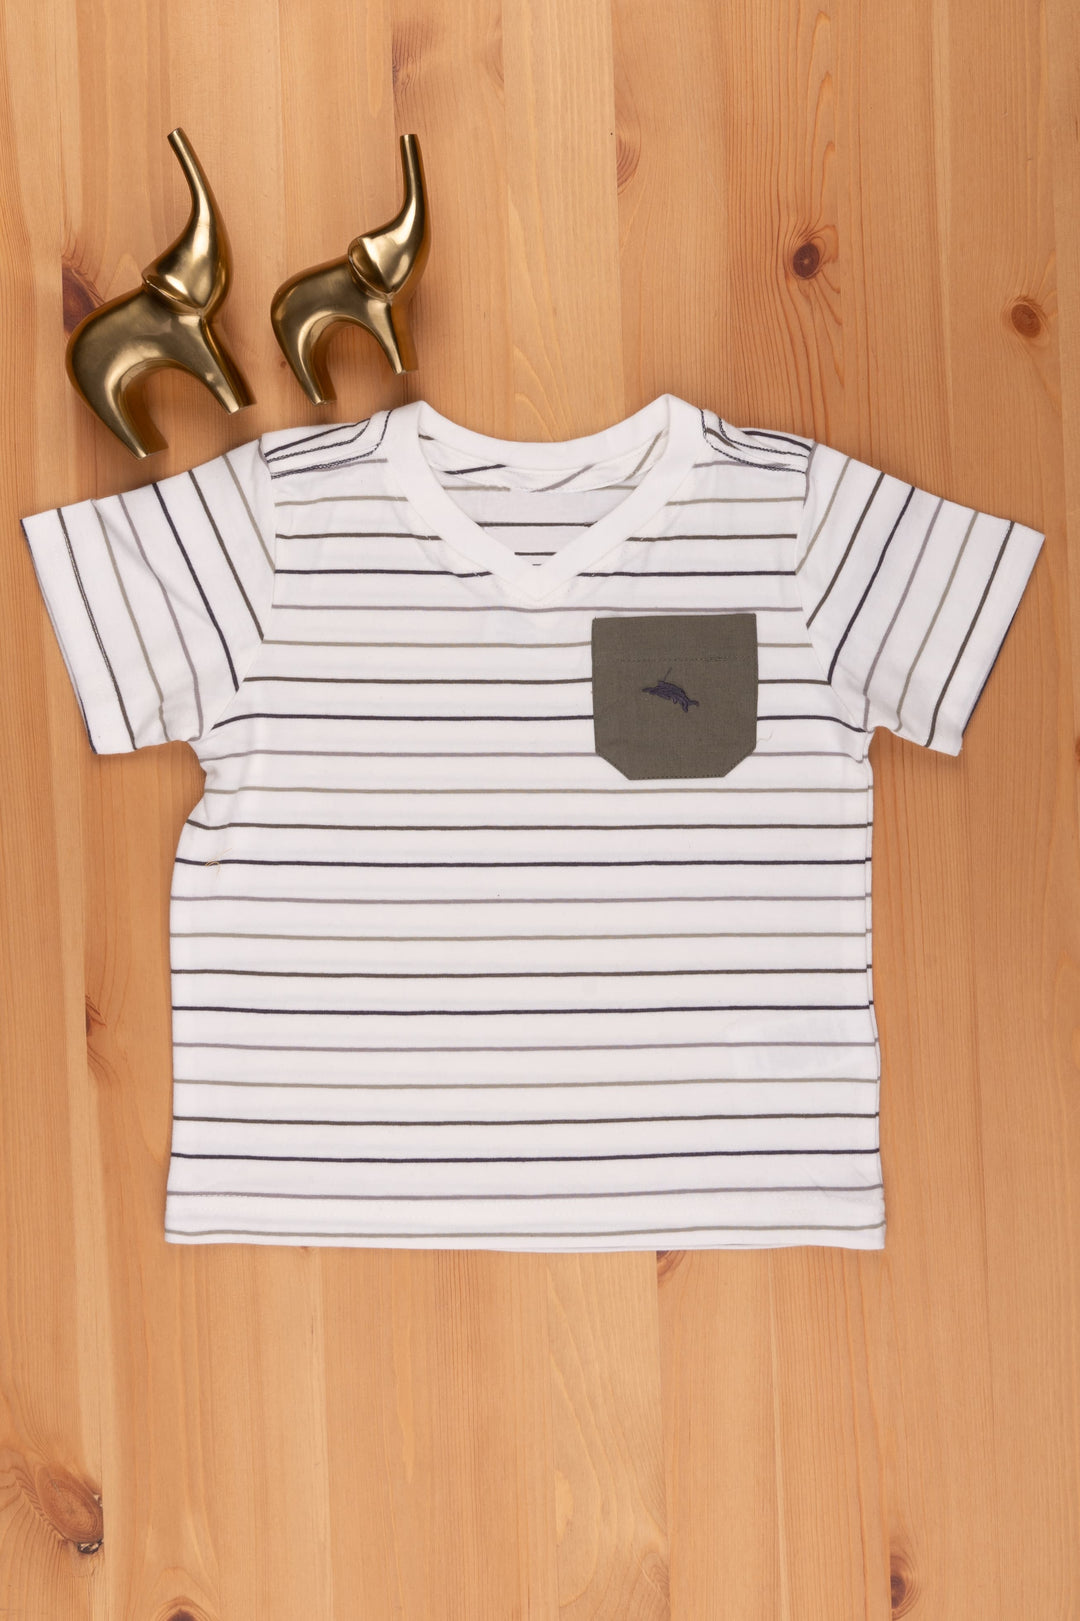 The Nesavu Boys T Shirt Cute and Trendy Kids Unisex T-Shirt for Fashionable Little Ones Nesavu 16 (1Y) / White LTP002B Find Boys' Printed T-Shirts in a Variety of Designs and Colors